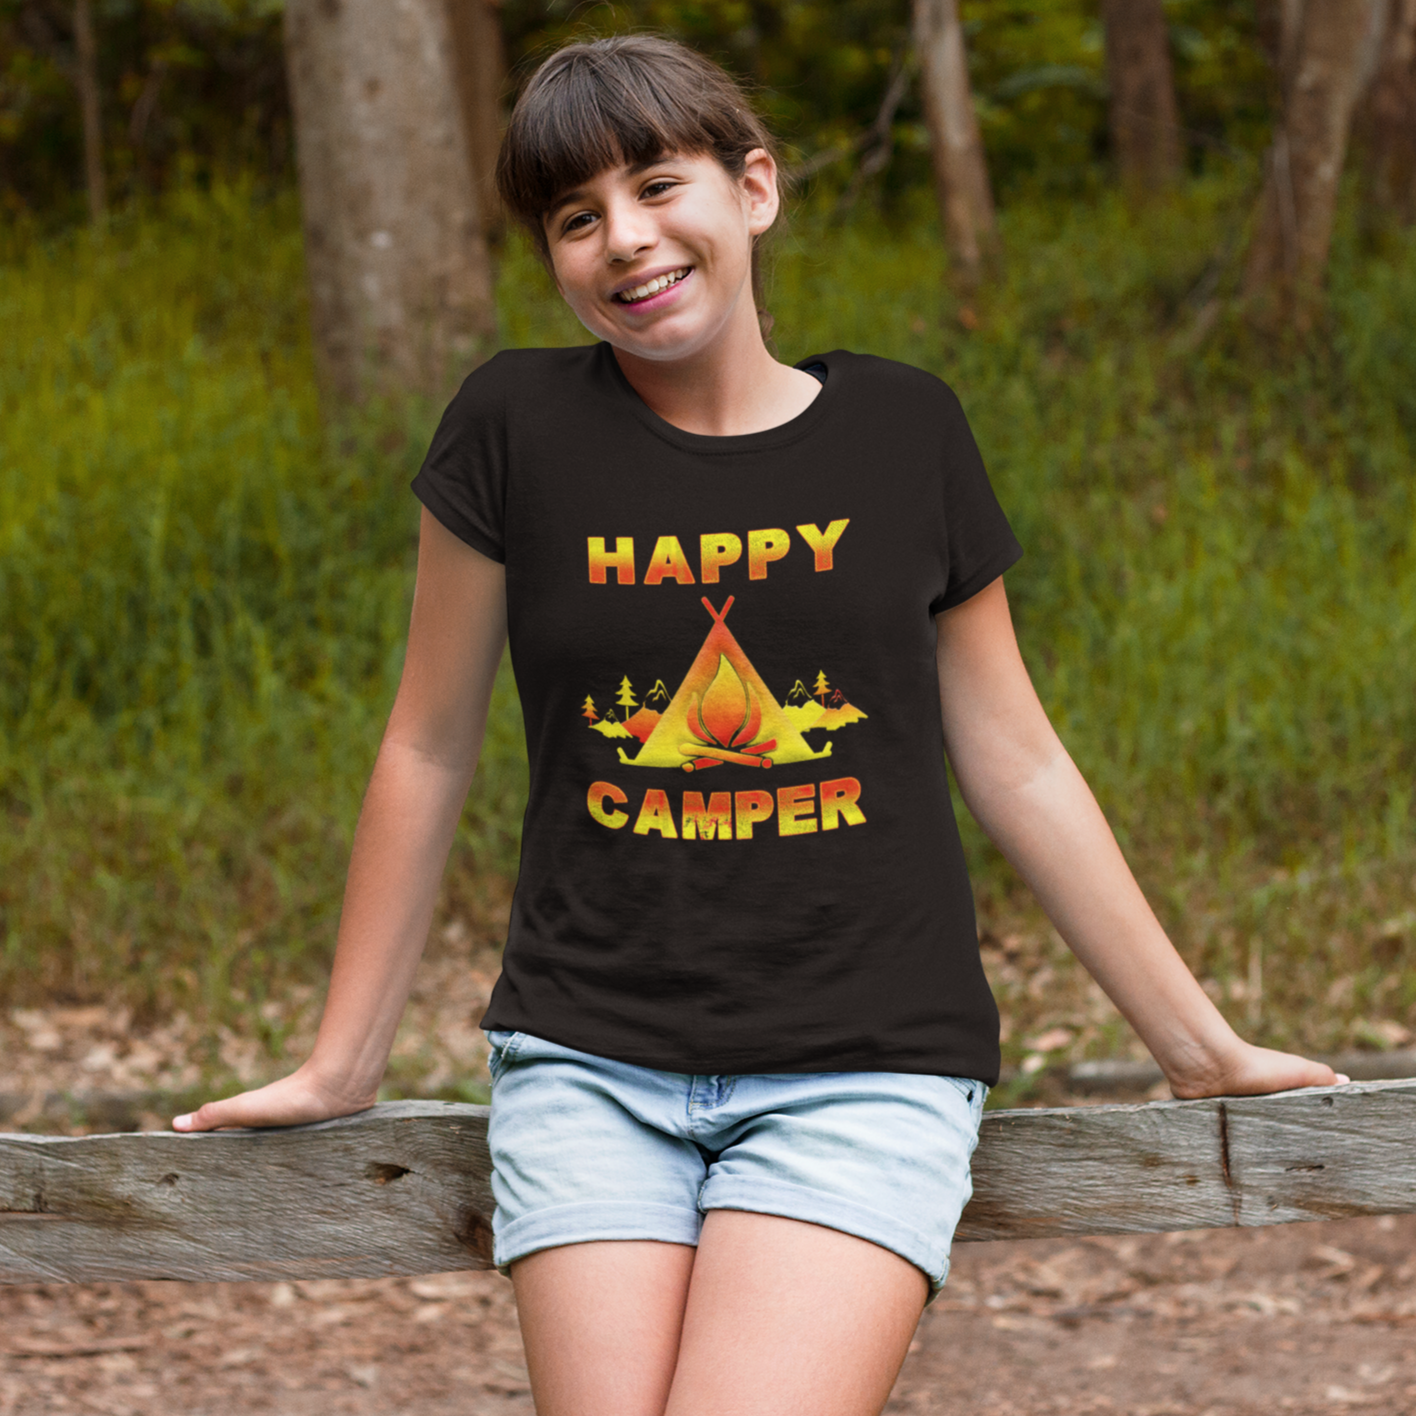 Camping Shirt for Girls - Camping Clothes for Girls - Happy Camper Camping Shirts for Kids Funny - image 3 of 9